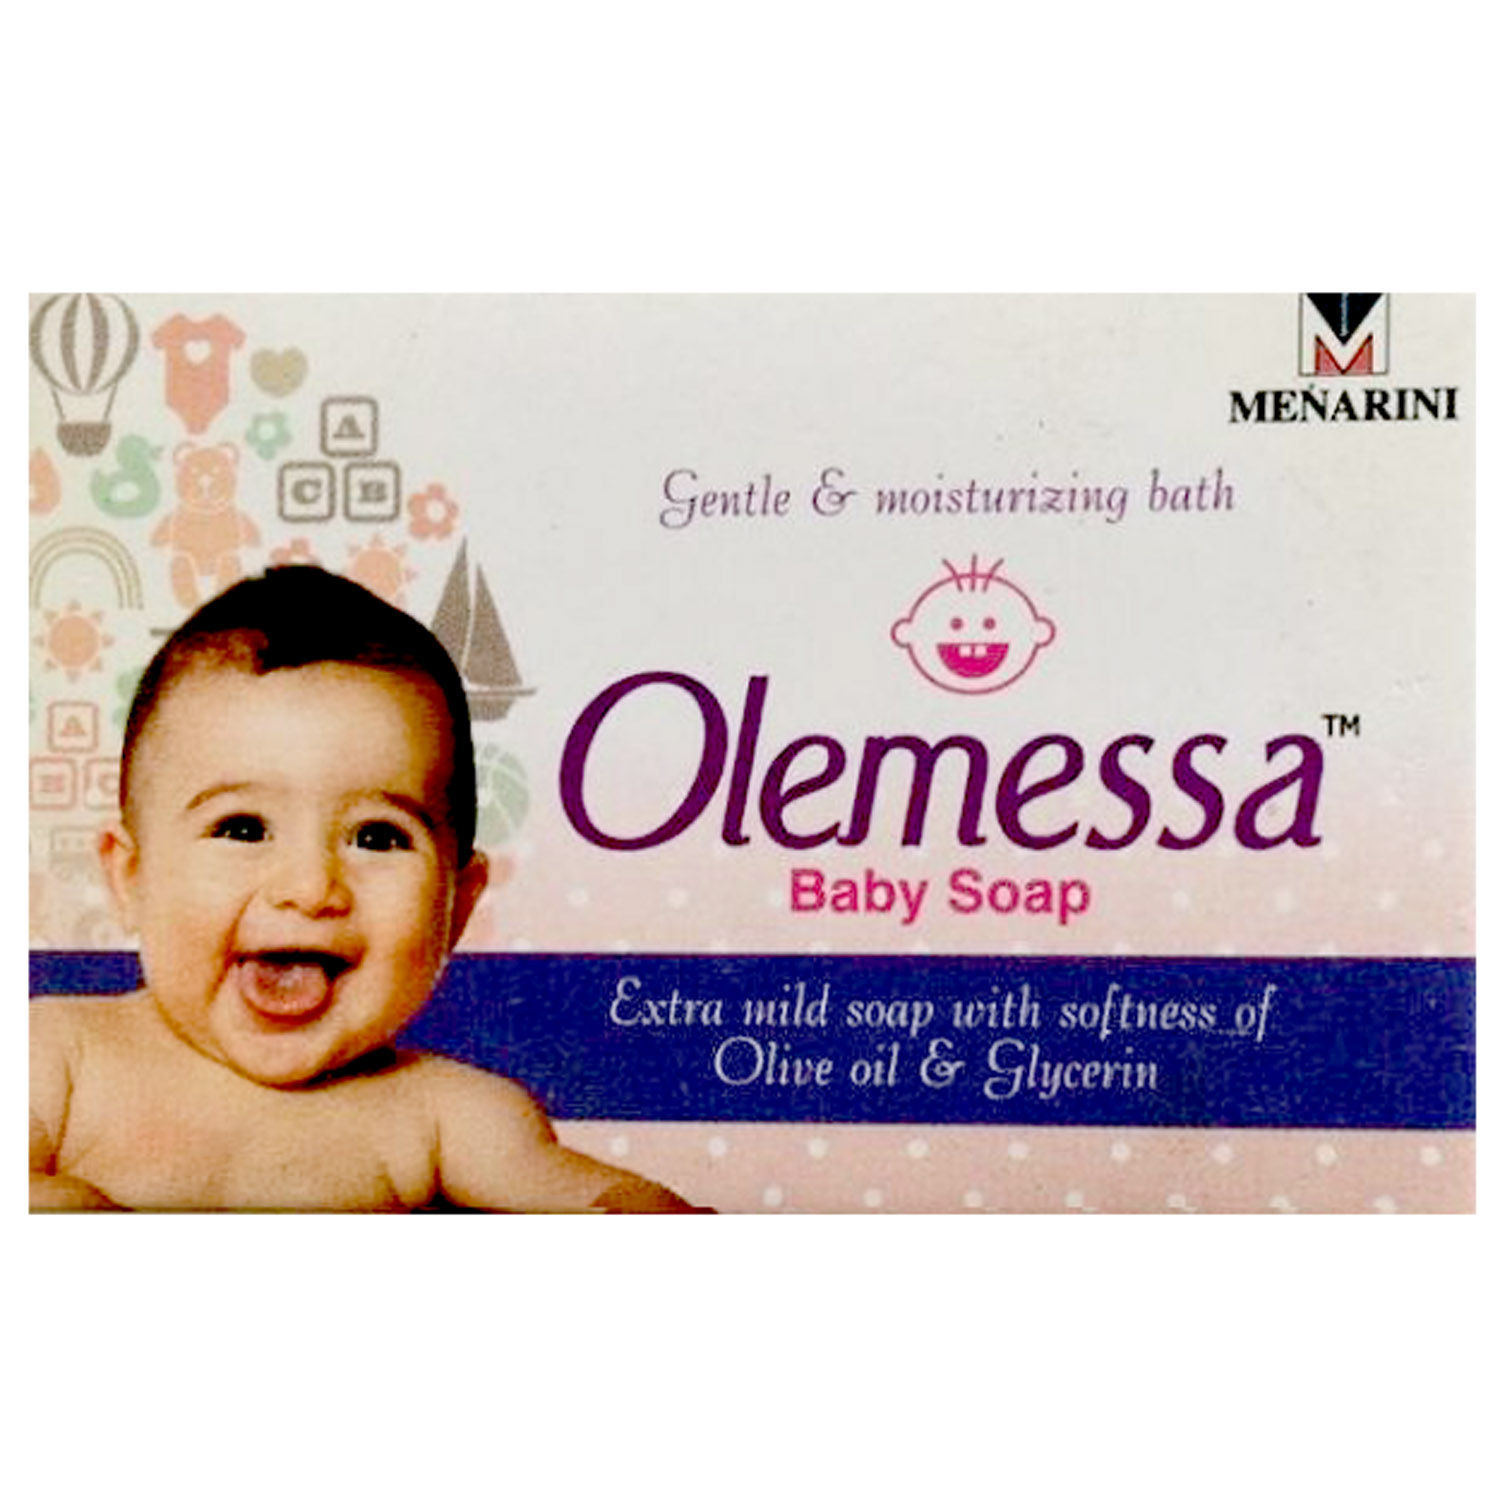 Olemessa Baby Soap, 75 gm, Pack of 1 